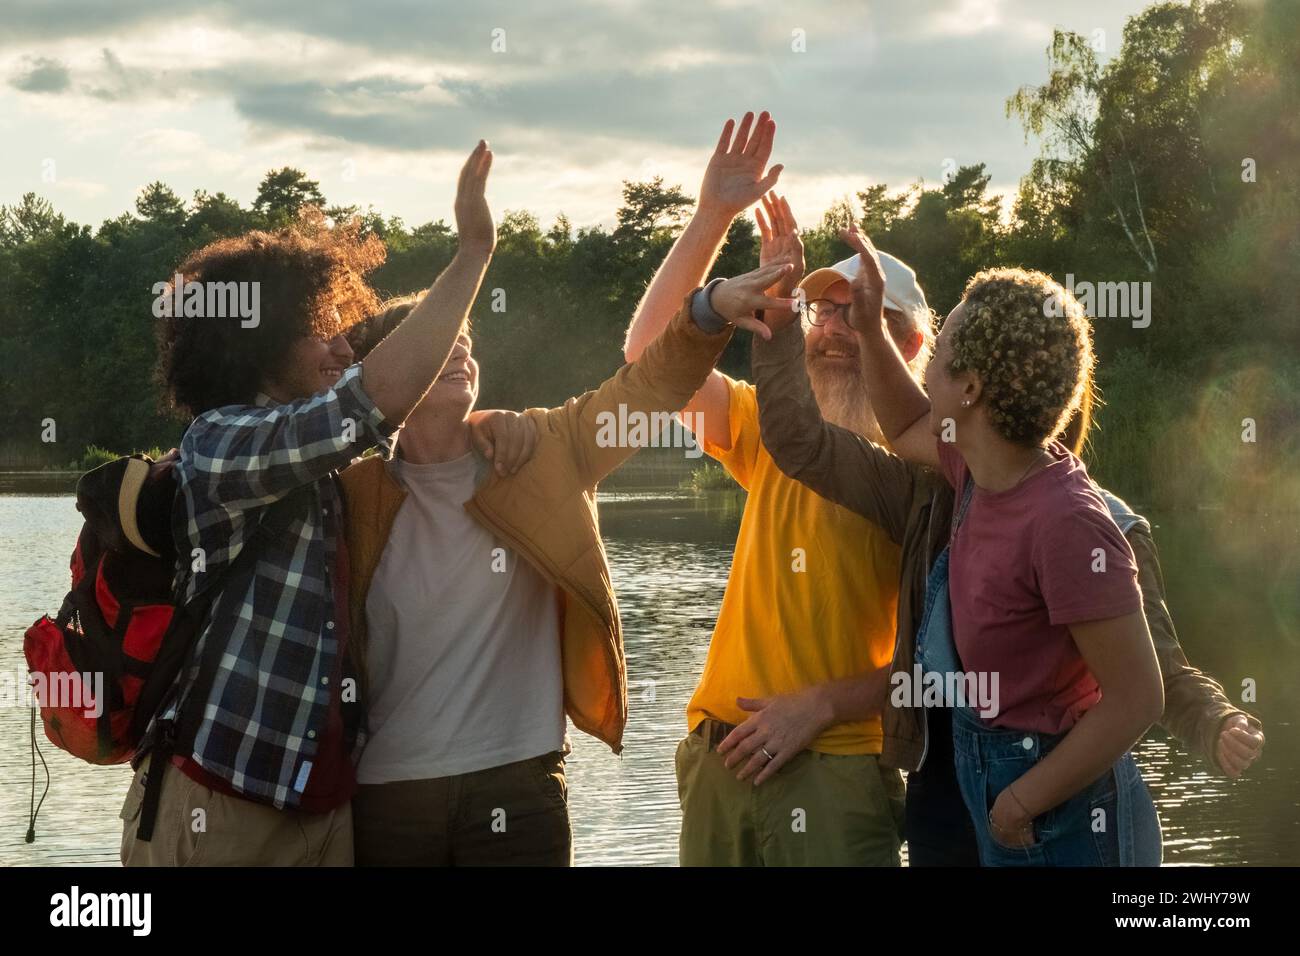 Millennial Friends High-Fiving on Hike Stock Photo